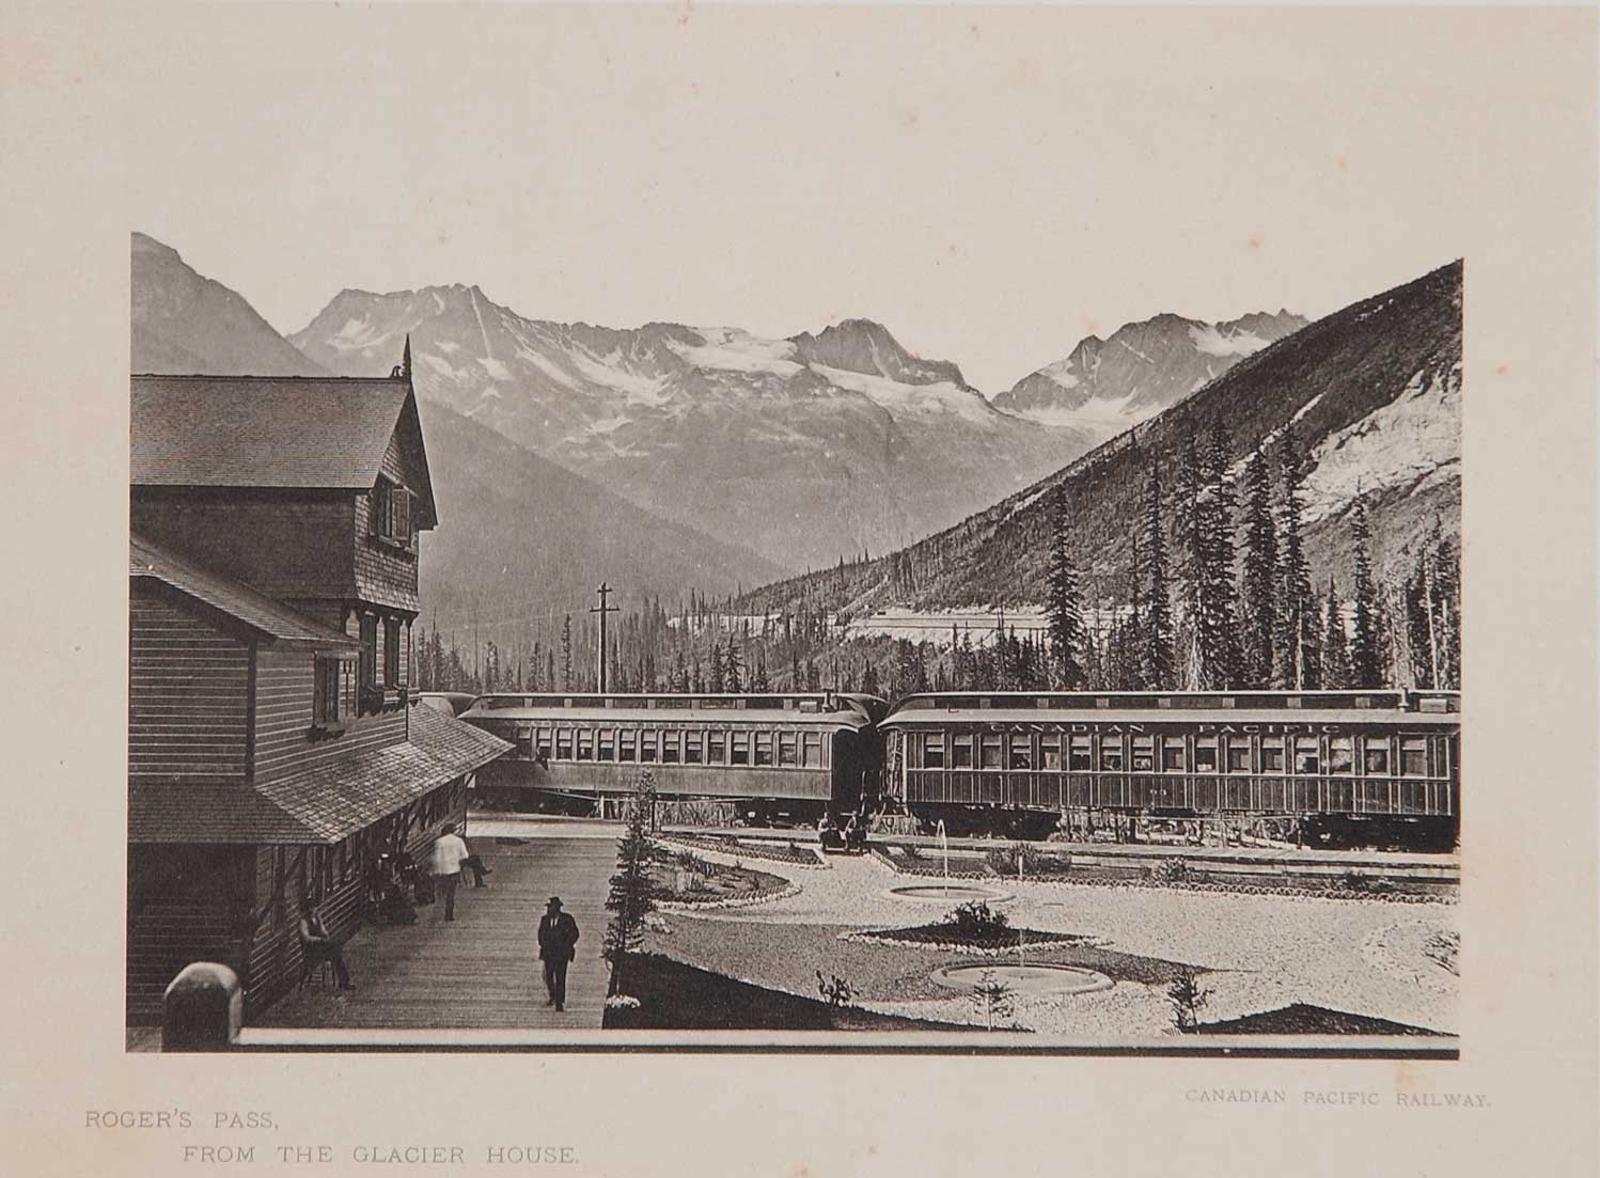 C.P.R. School - Roger's Pass, From the Glacier House